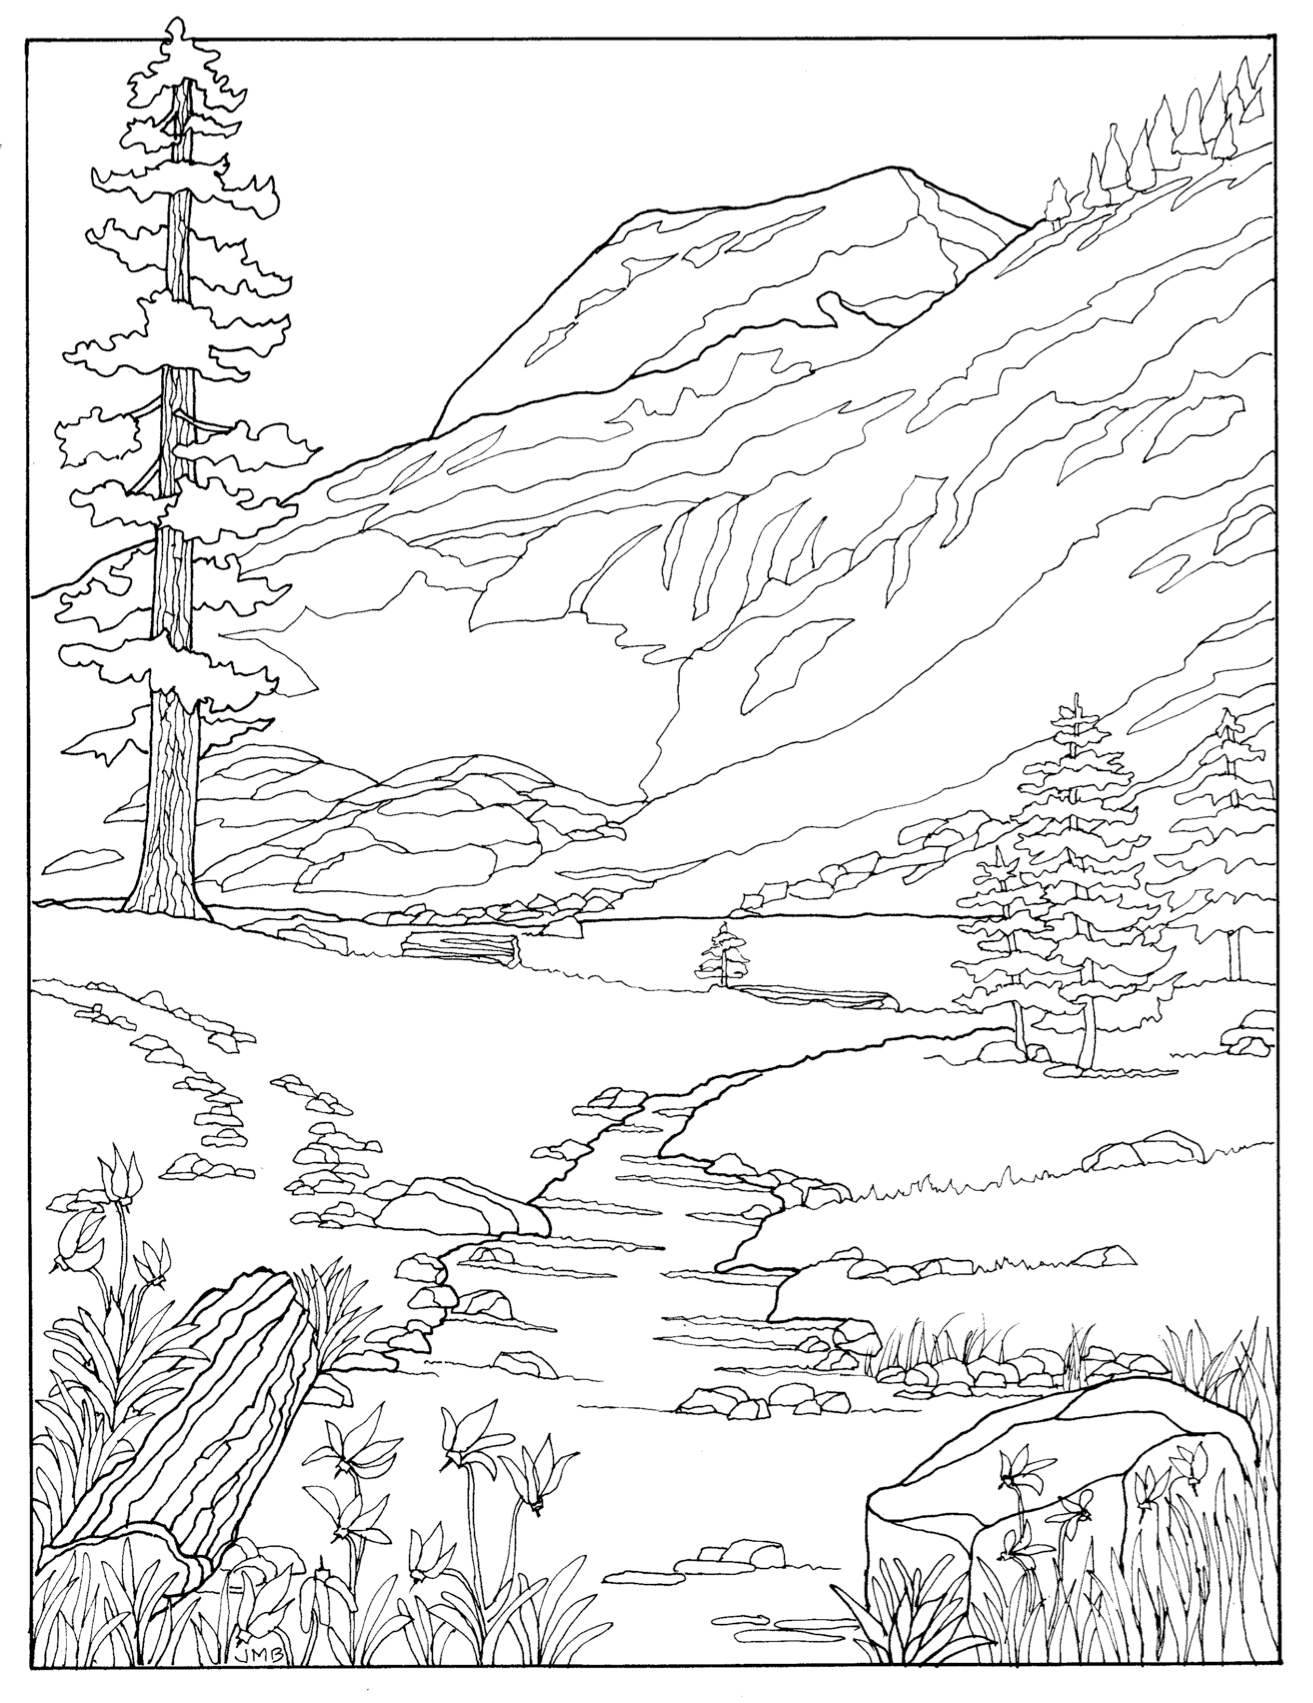 White Chief as it appears in the coloring book "Hear t of Mineral King"